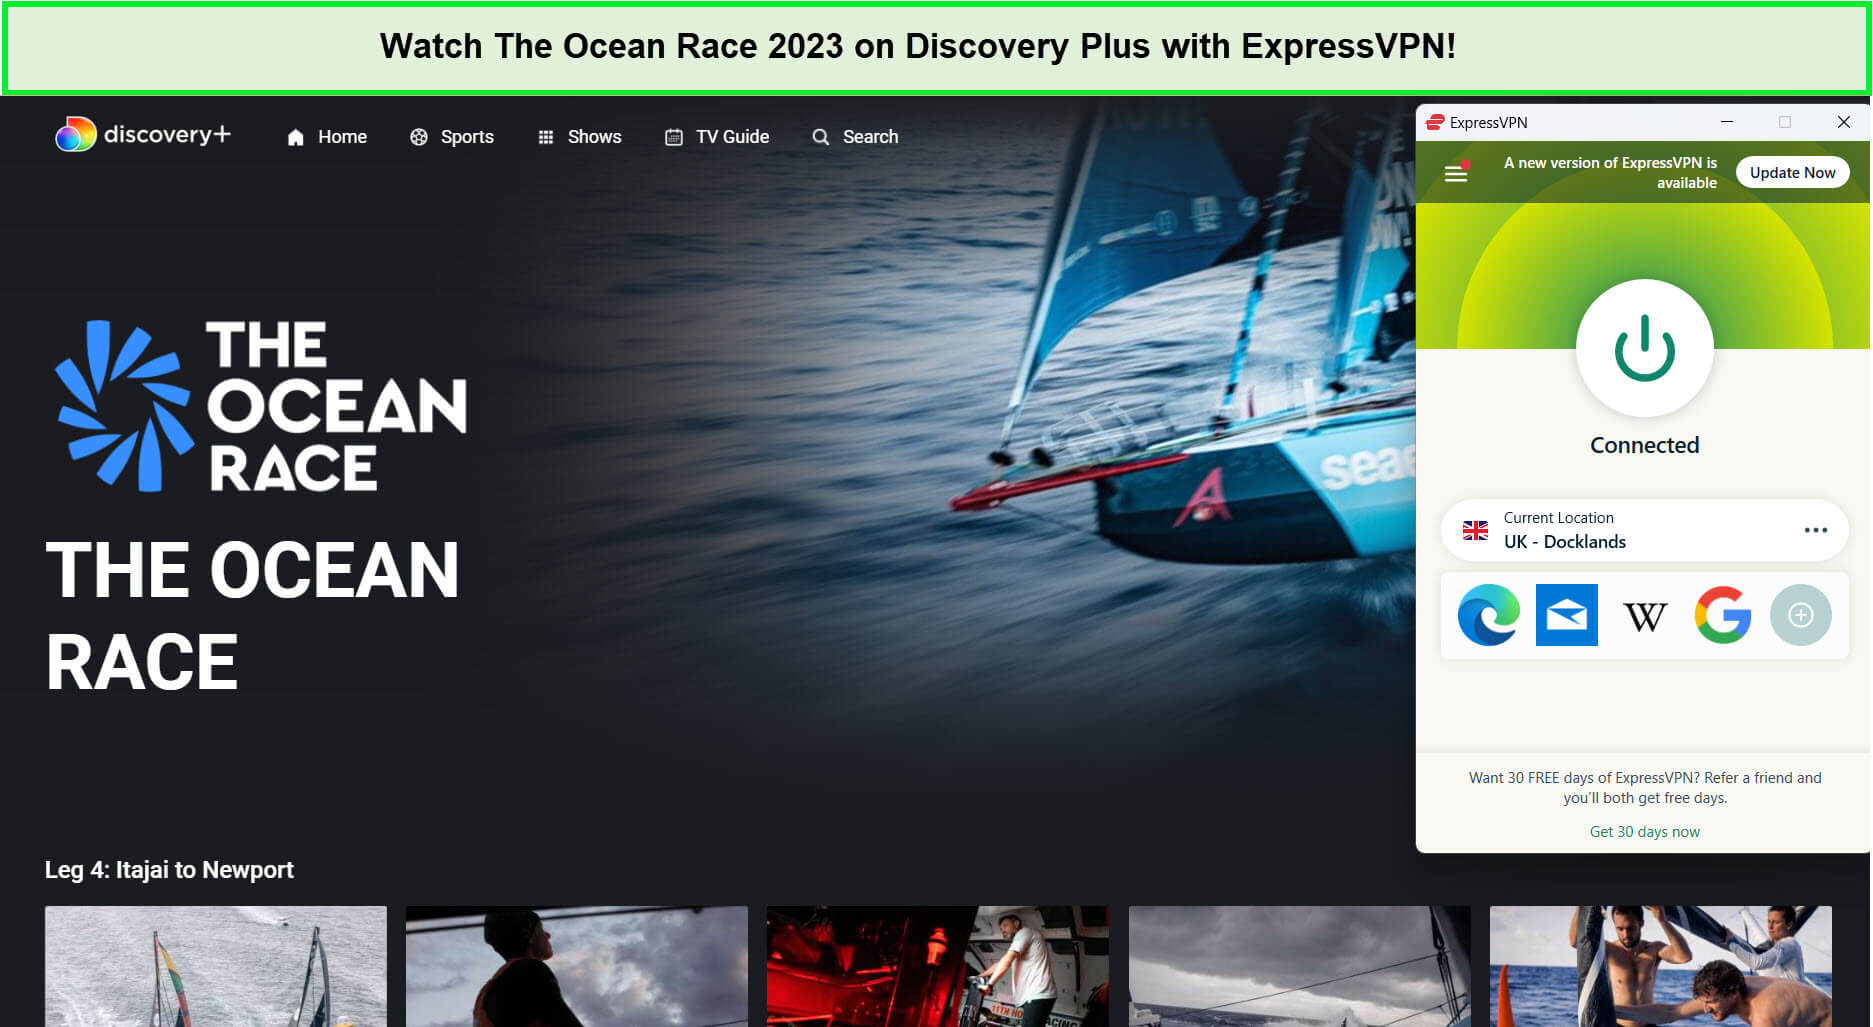 expressvpn-unblocks-the-ocean-race-2023-live-in-canada-on-discovery-plus